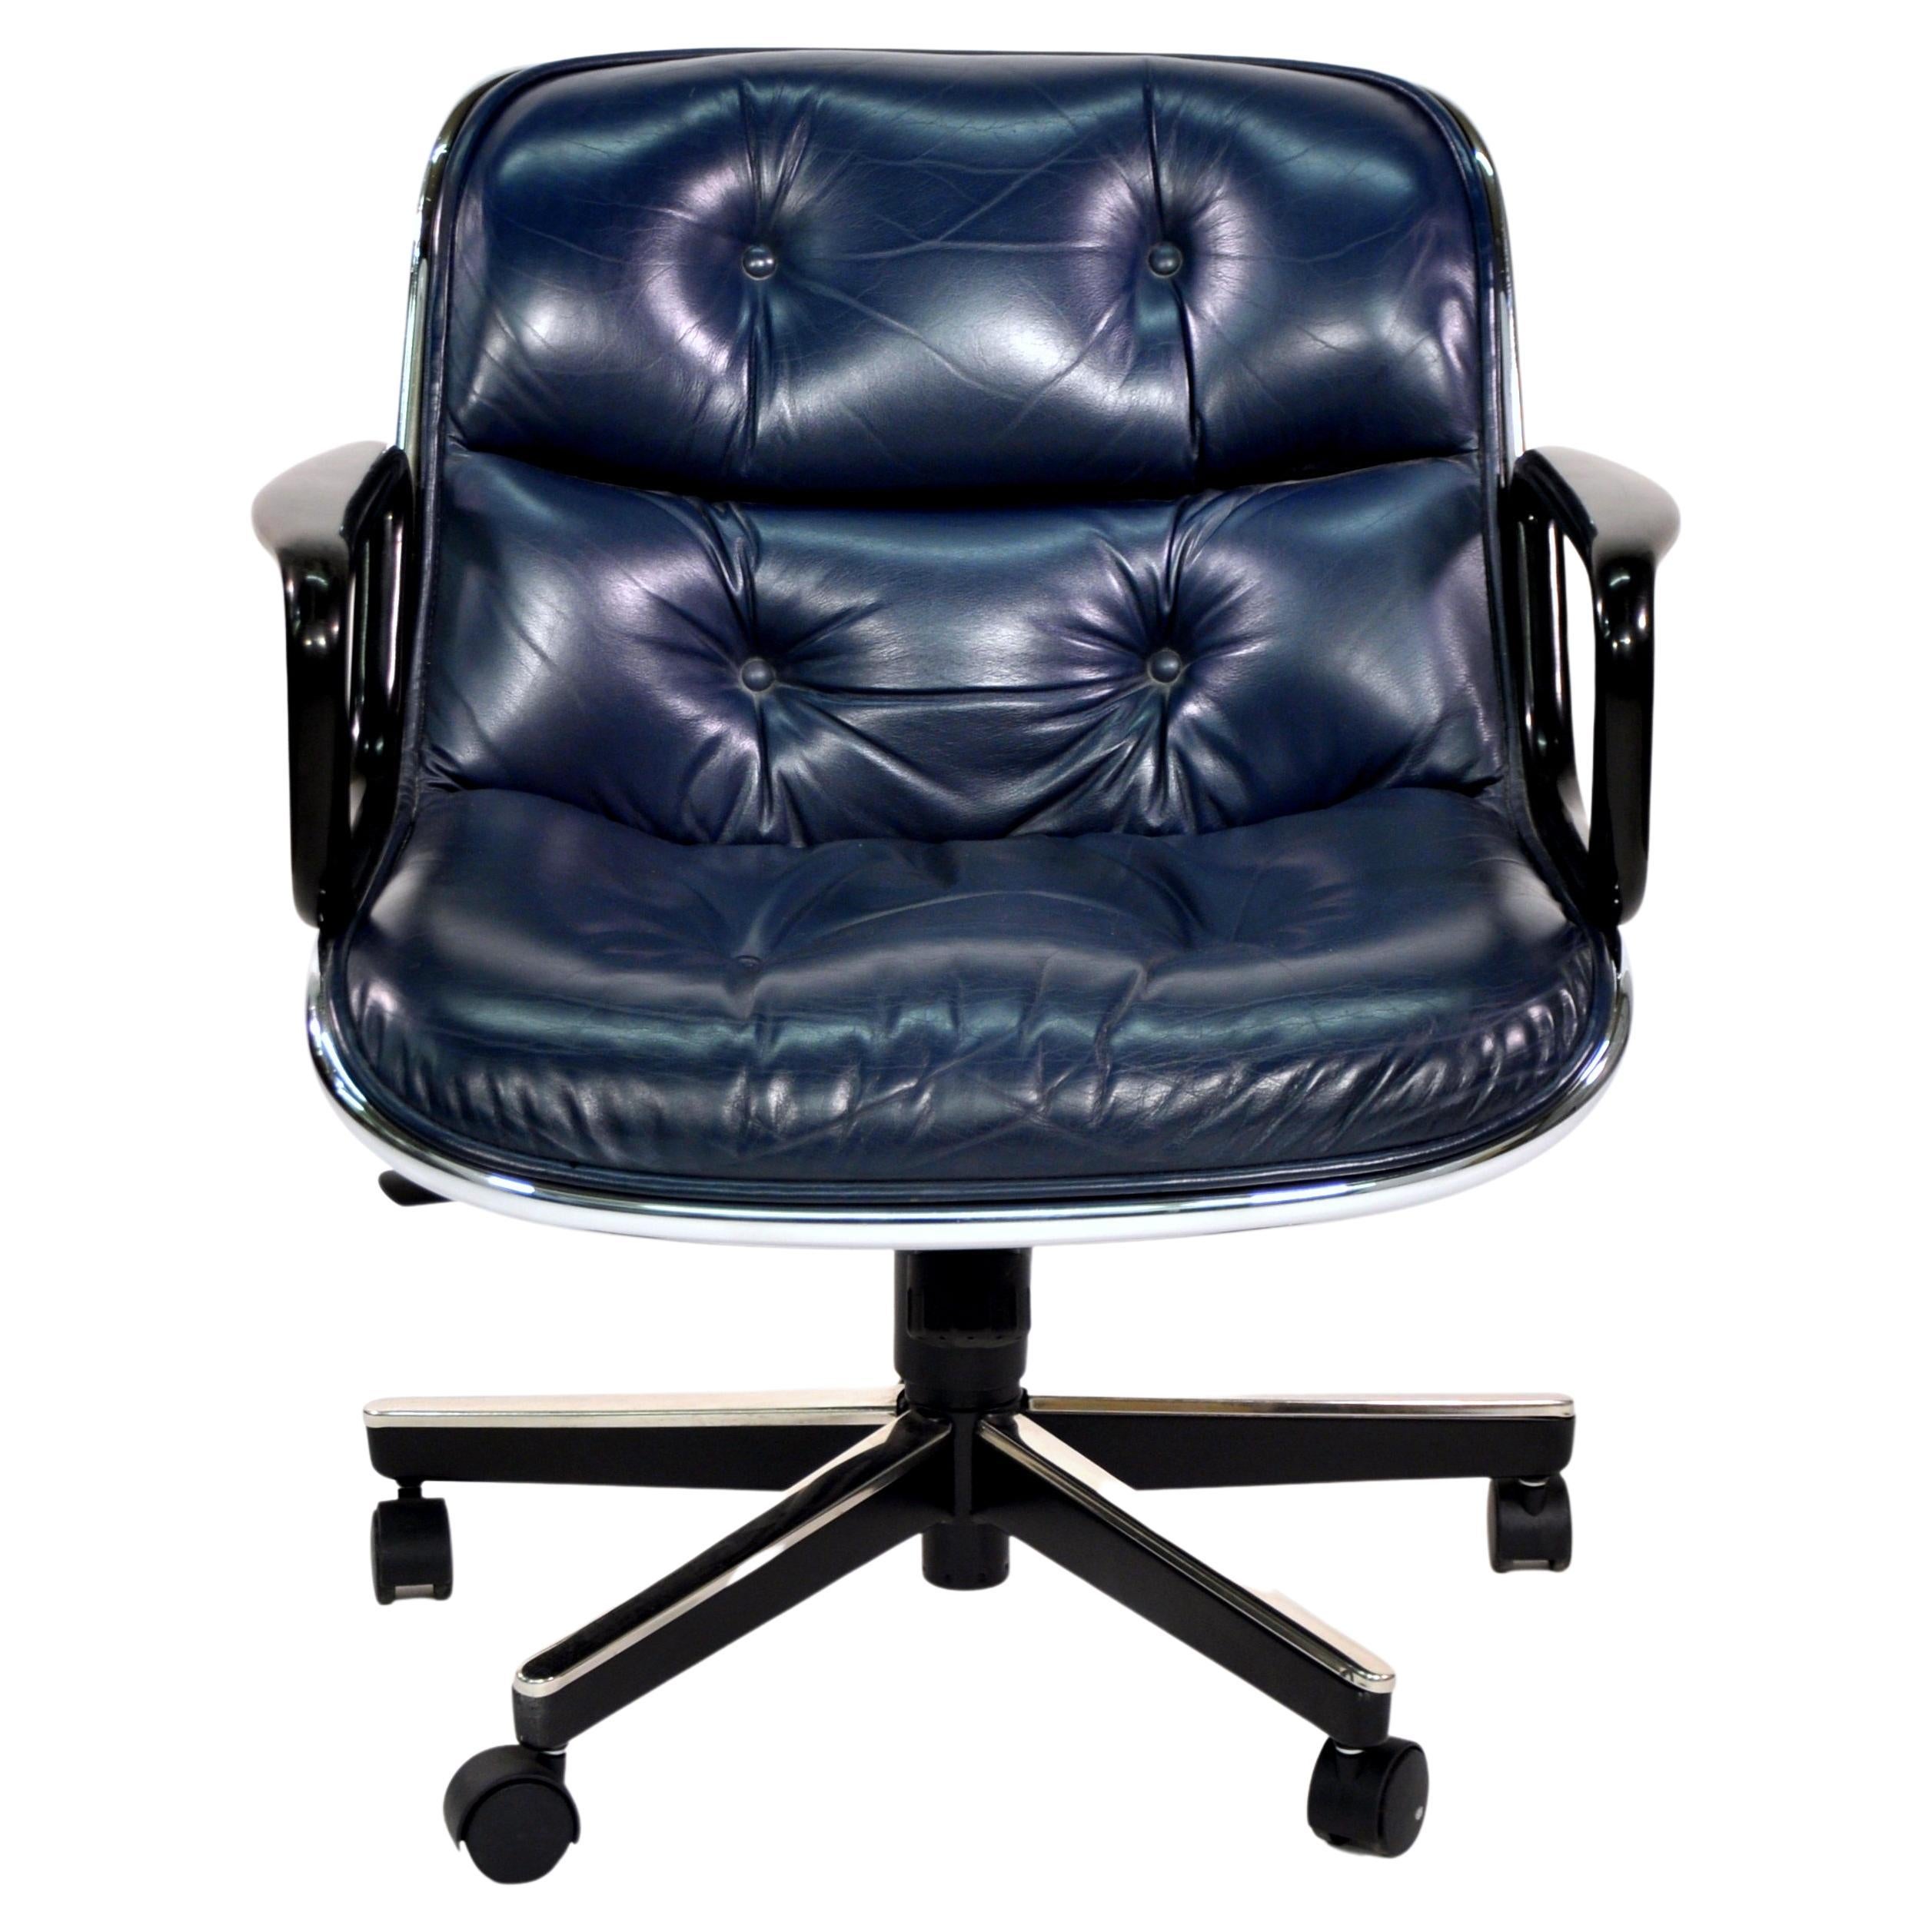 A vintage navy blue leather rolling office chair designed by Charles Pollock and manufactured by Knoll. The armchair has sleek lines, star base, chrome detail and the original dark blue leather.